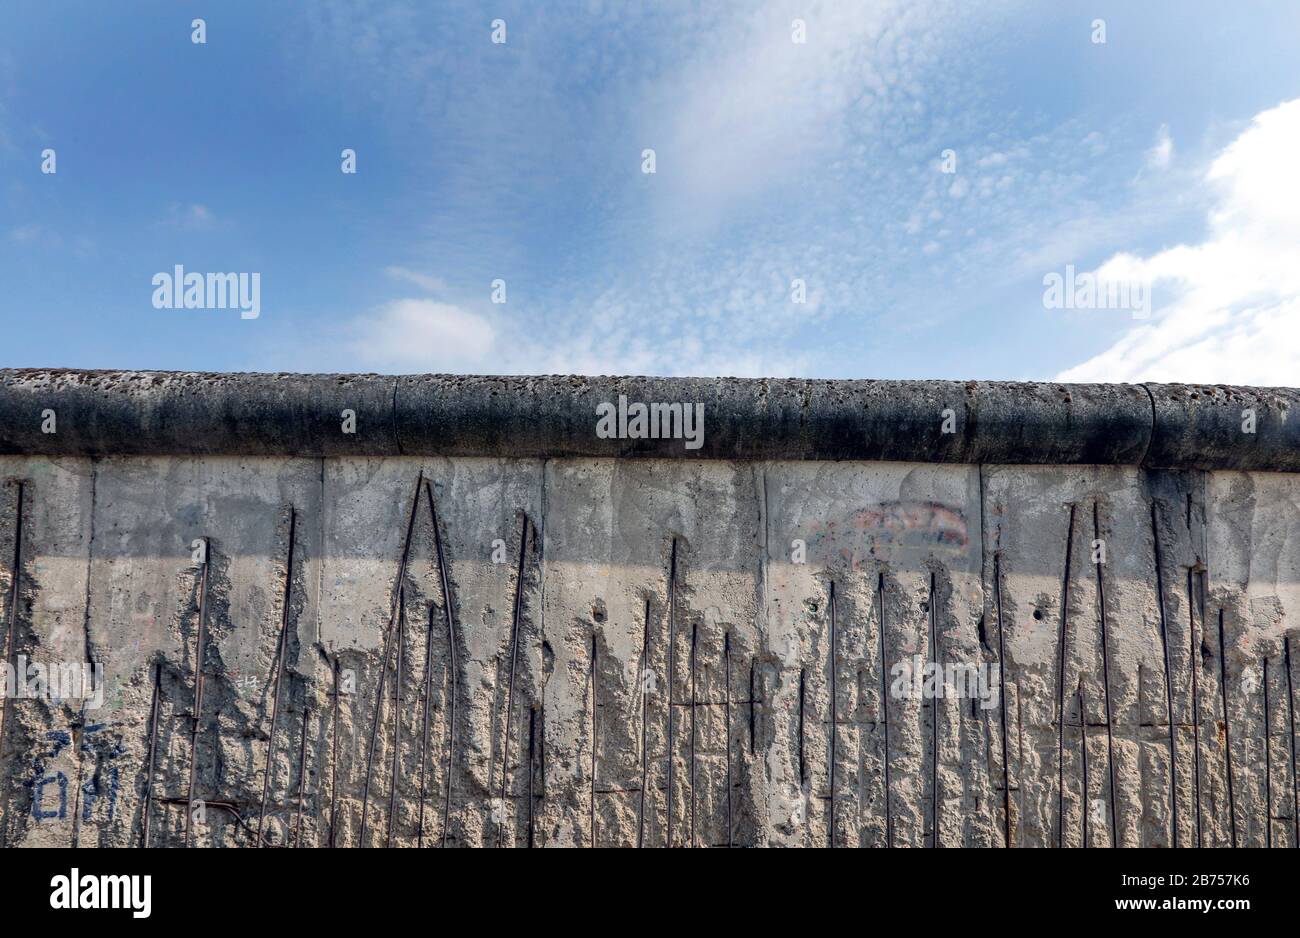 Remains of the Berlin Wall on Bernauer Strasse. This year, on November 9, 2019, the fall of the Berlin Wall will be the 30th anniversary of its fall. [automated translation] Stock Photo